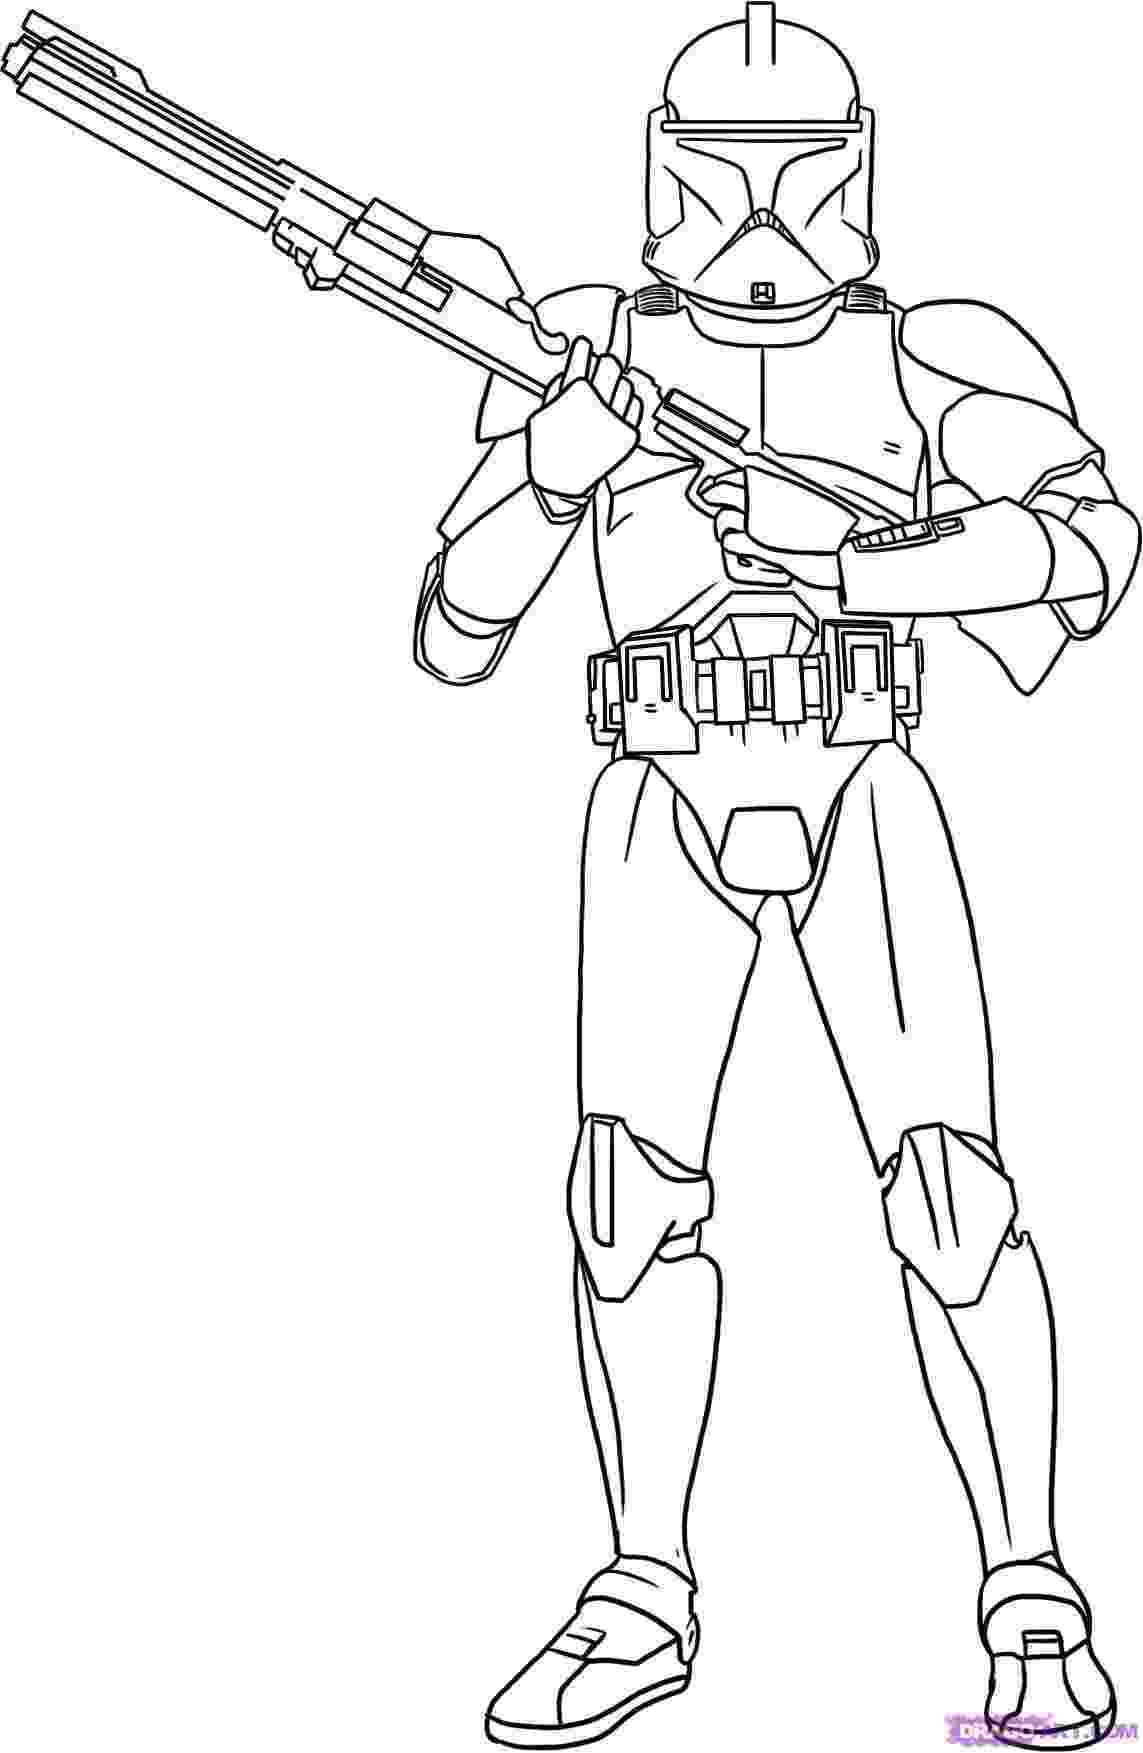 the clone wars coloring pages star wars coloring pages free printable star wars the coloring pages wars clone 